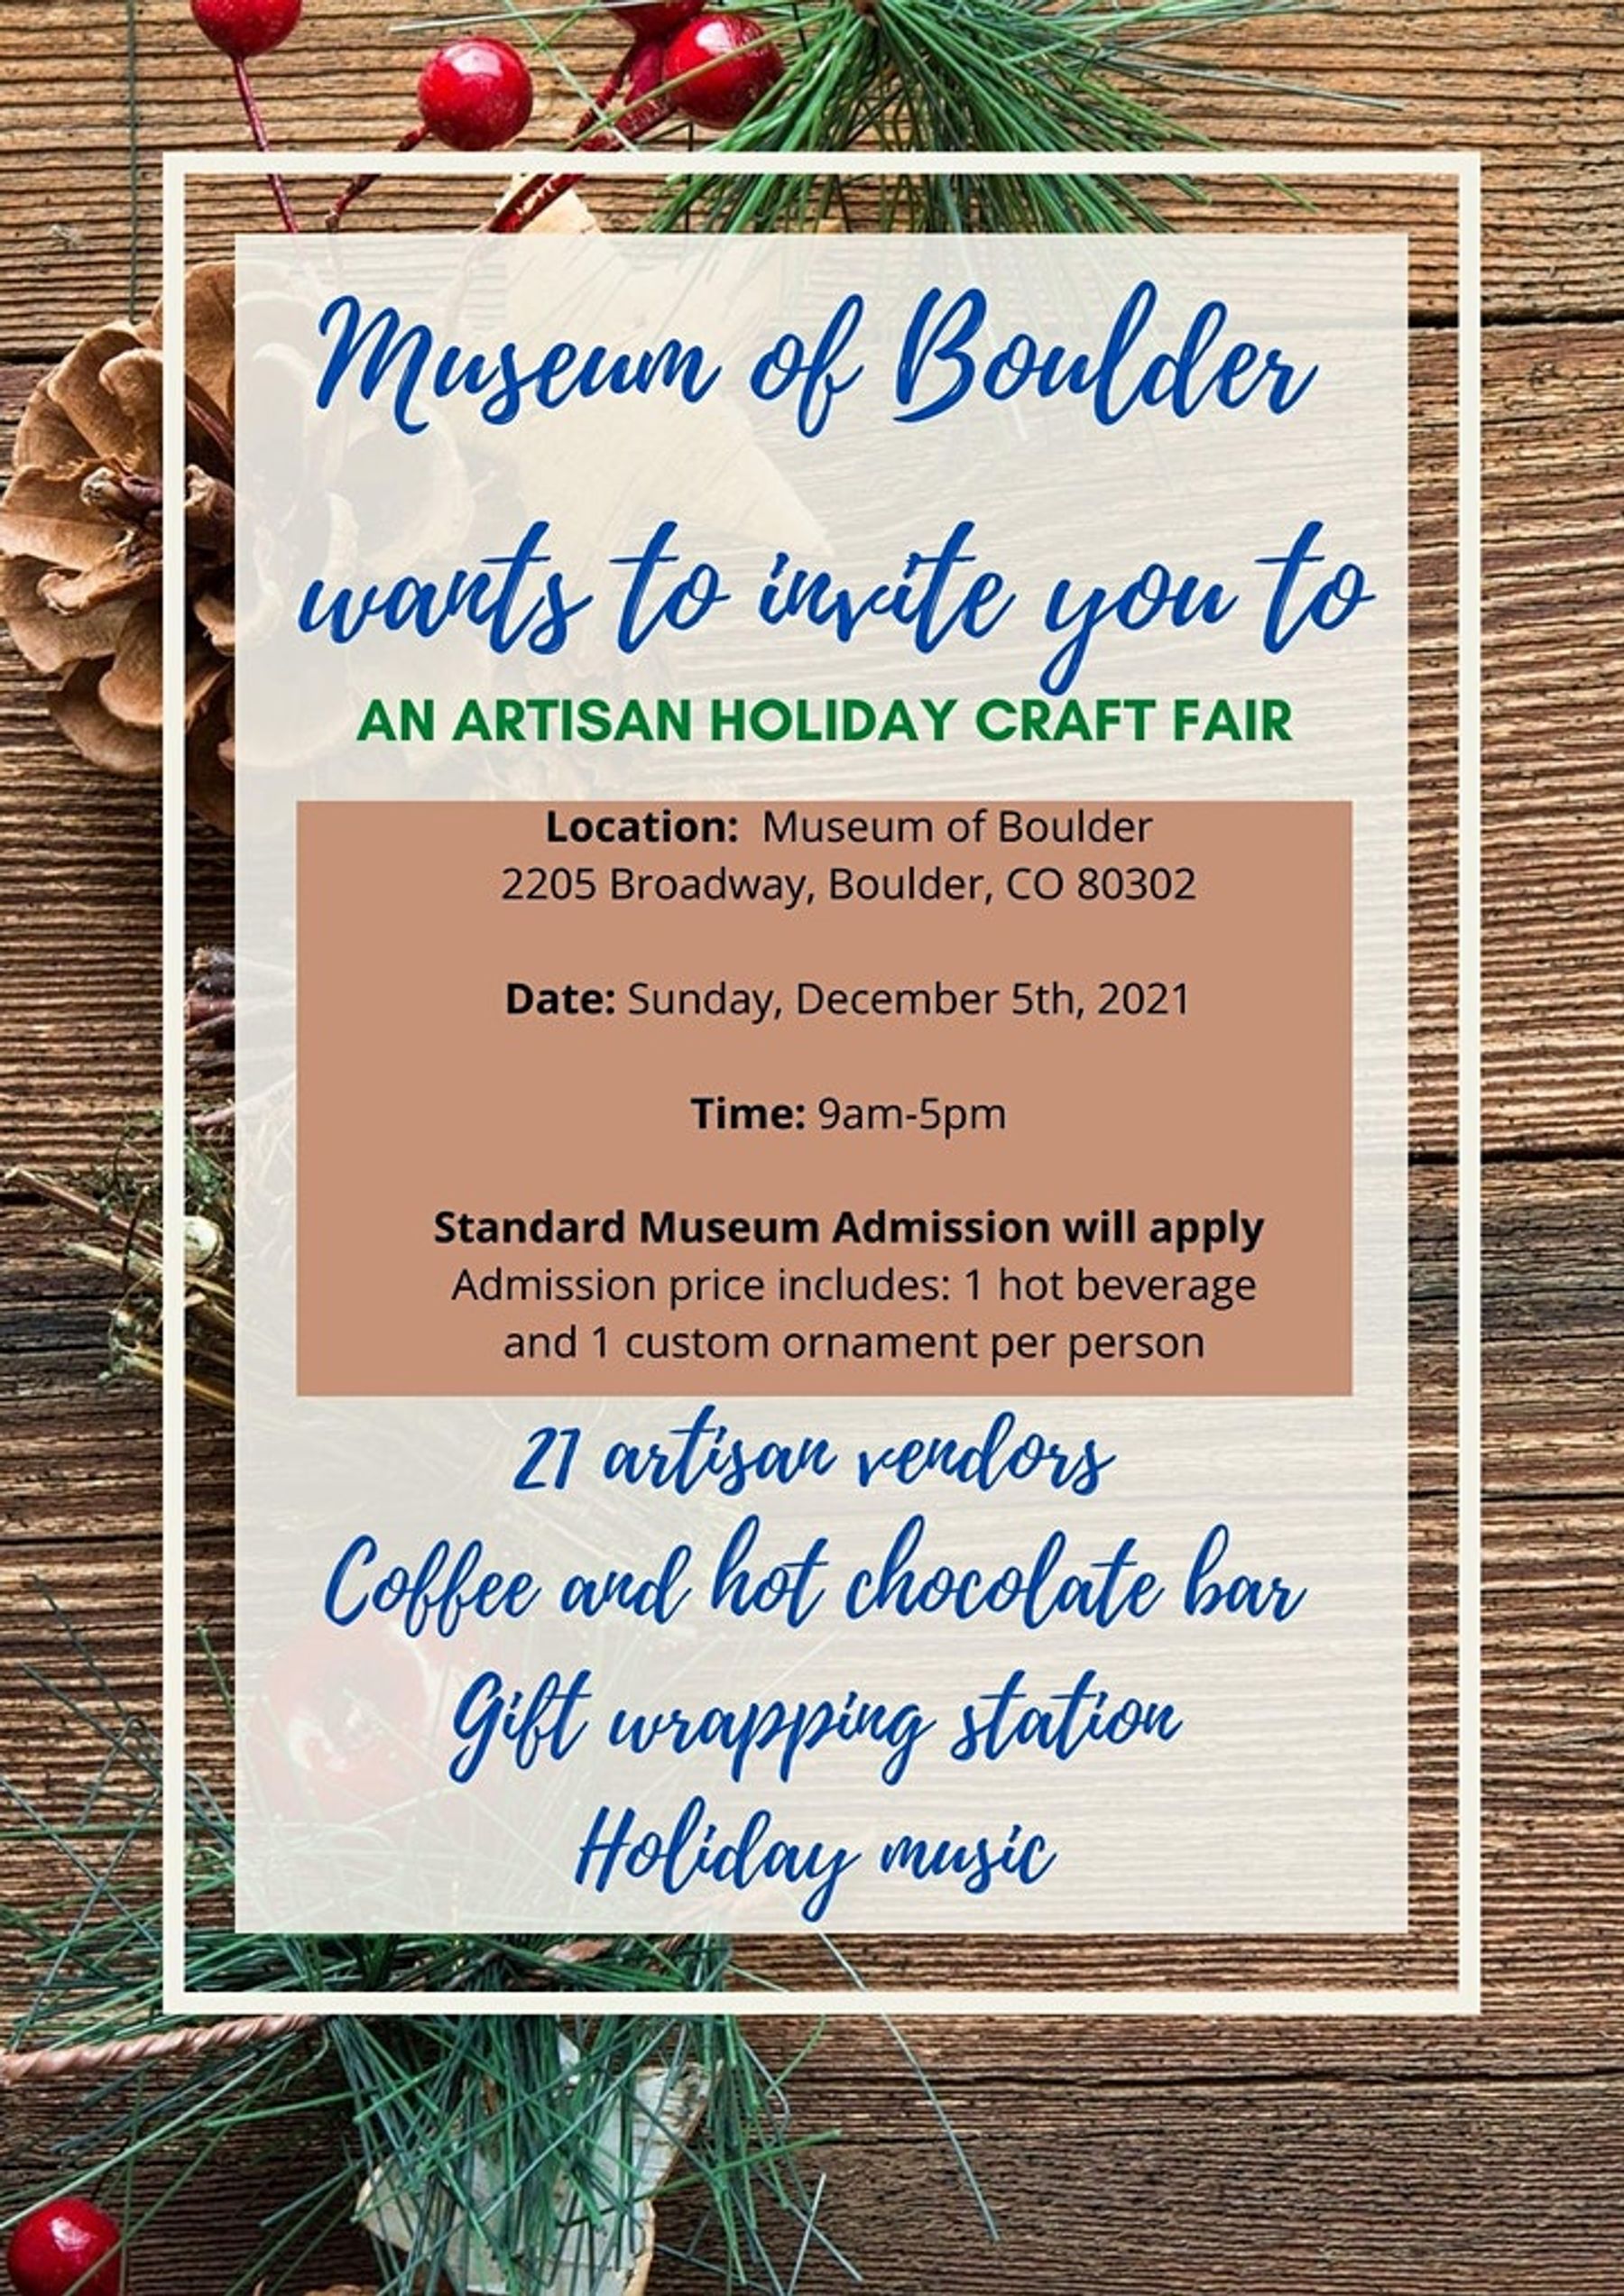 Artisan Holiday Craft Fair at the Museum of Boulder Downtown Boulder, CO